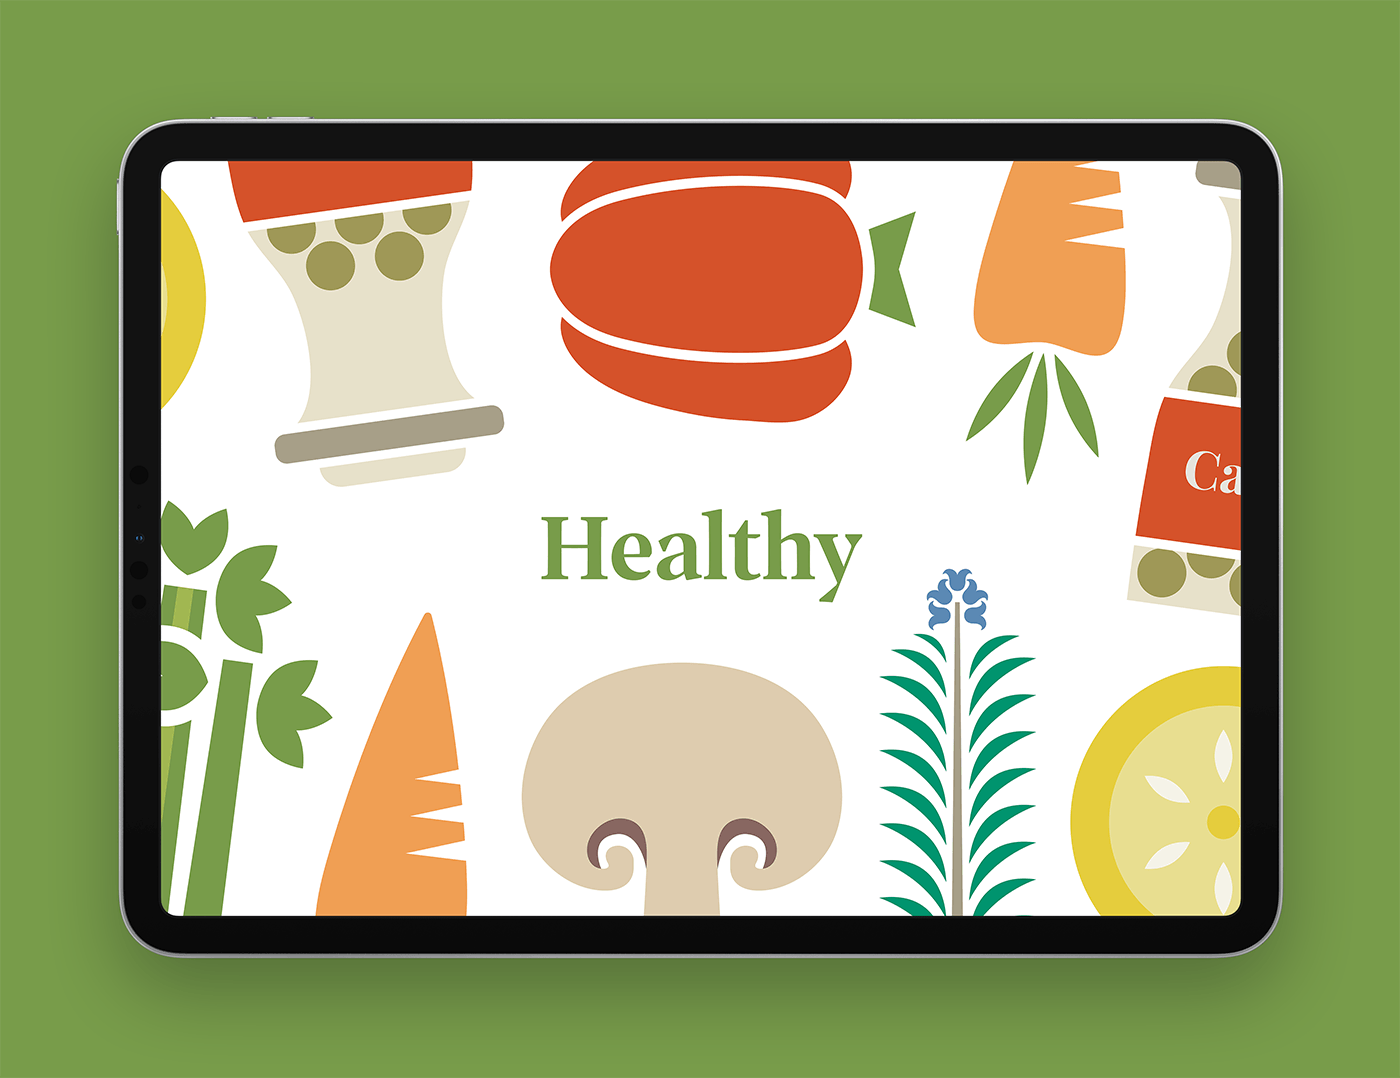 Cookbook page shown on an iPad screen, with the word 'Healthy' surrounded by illustrations of different healthy foods